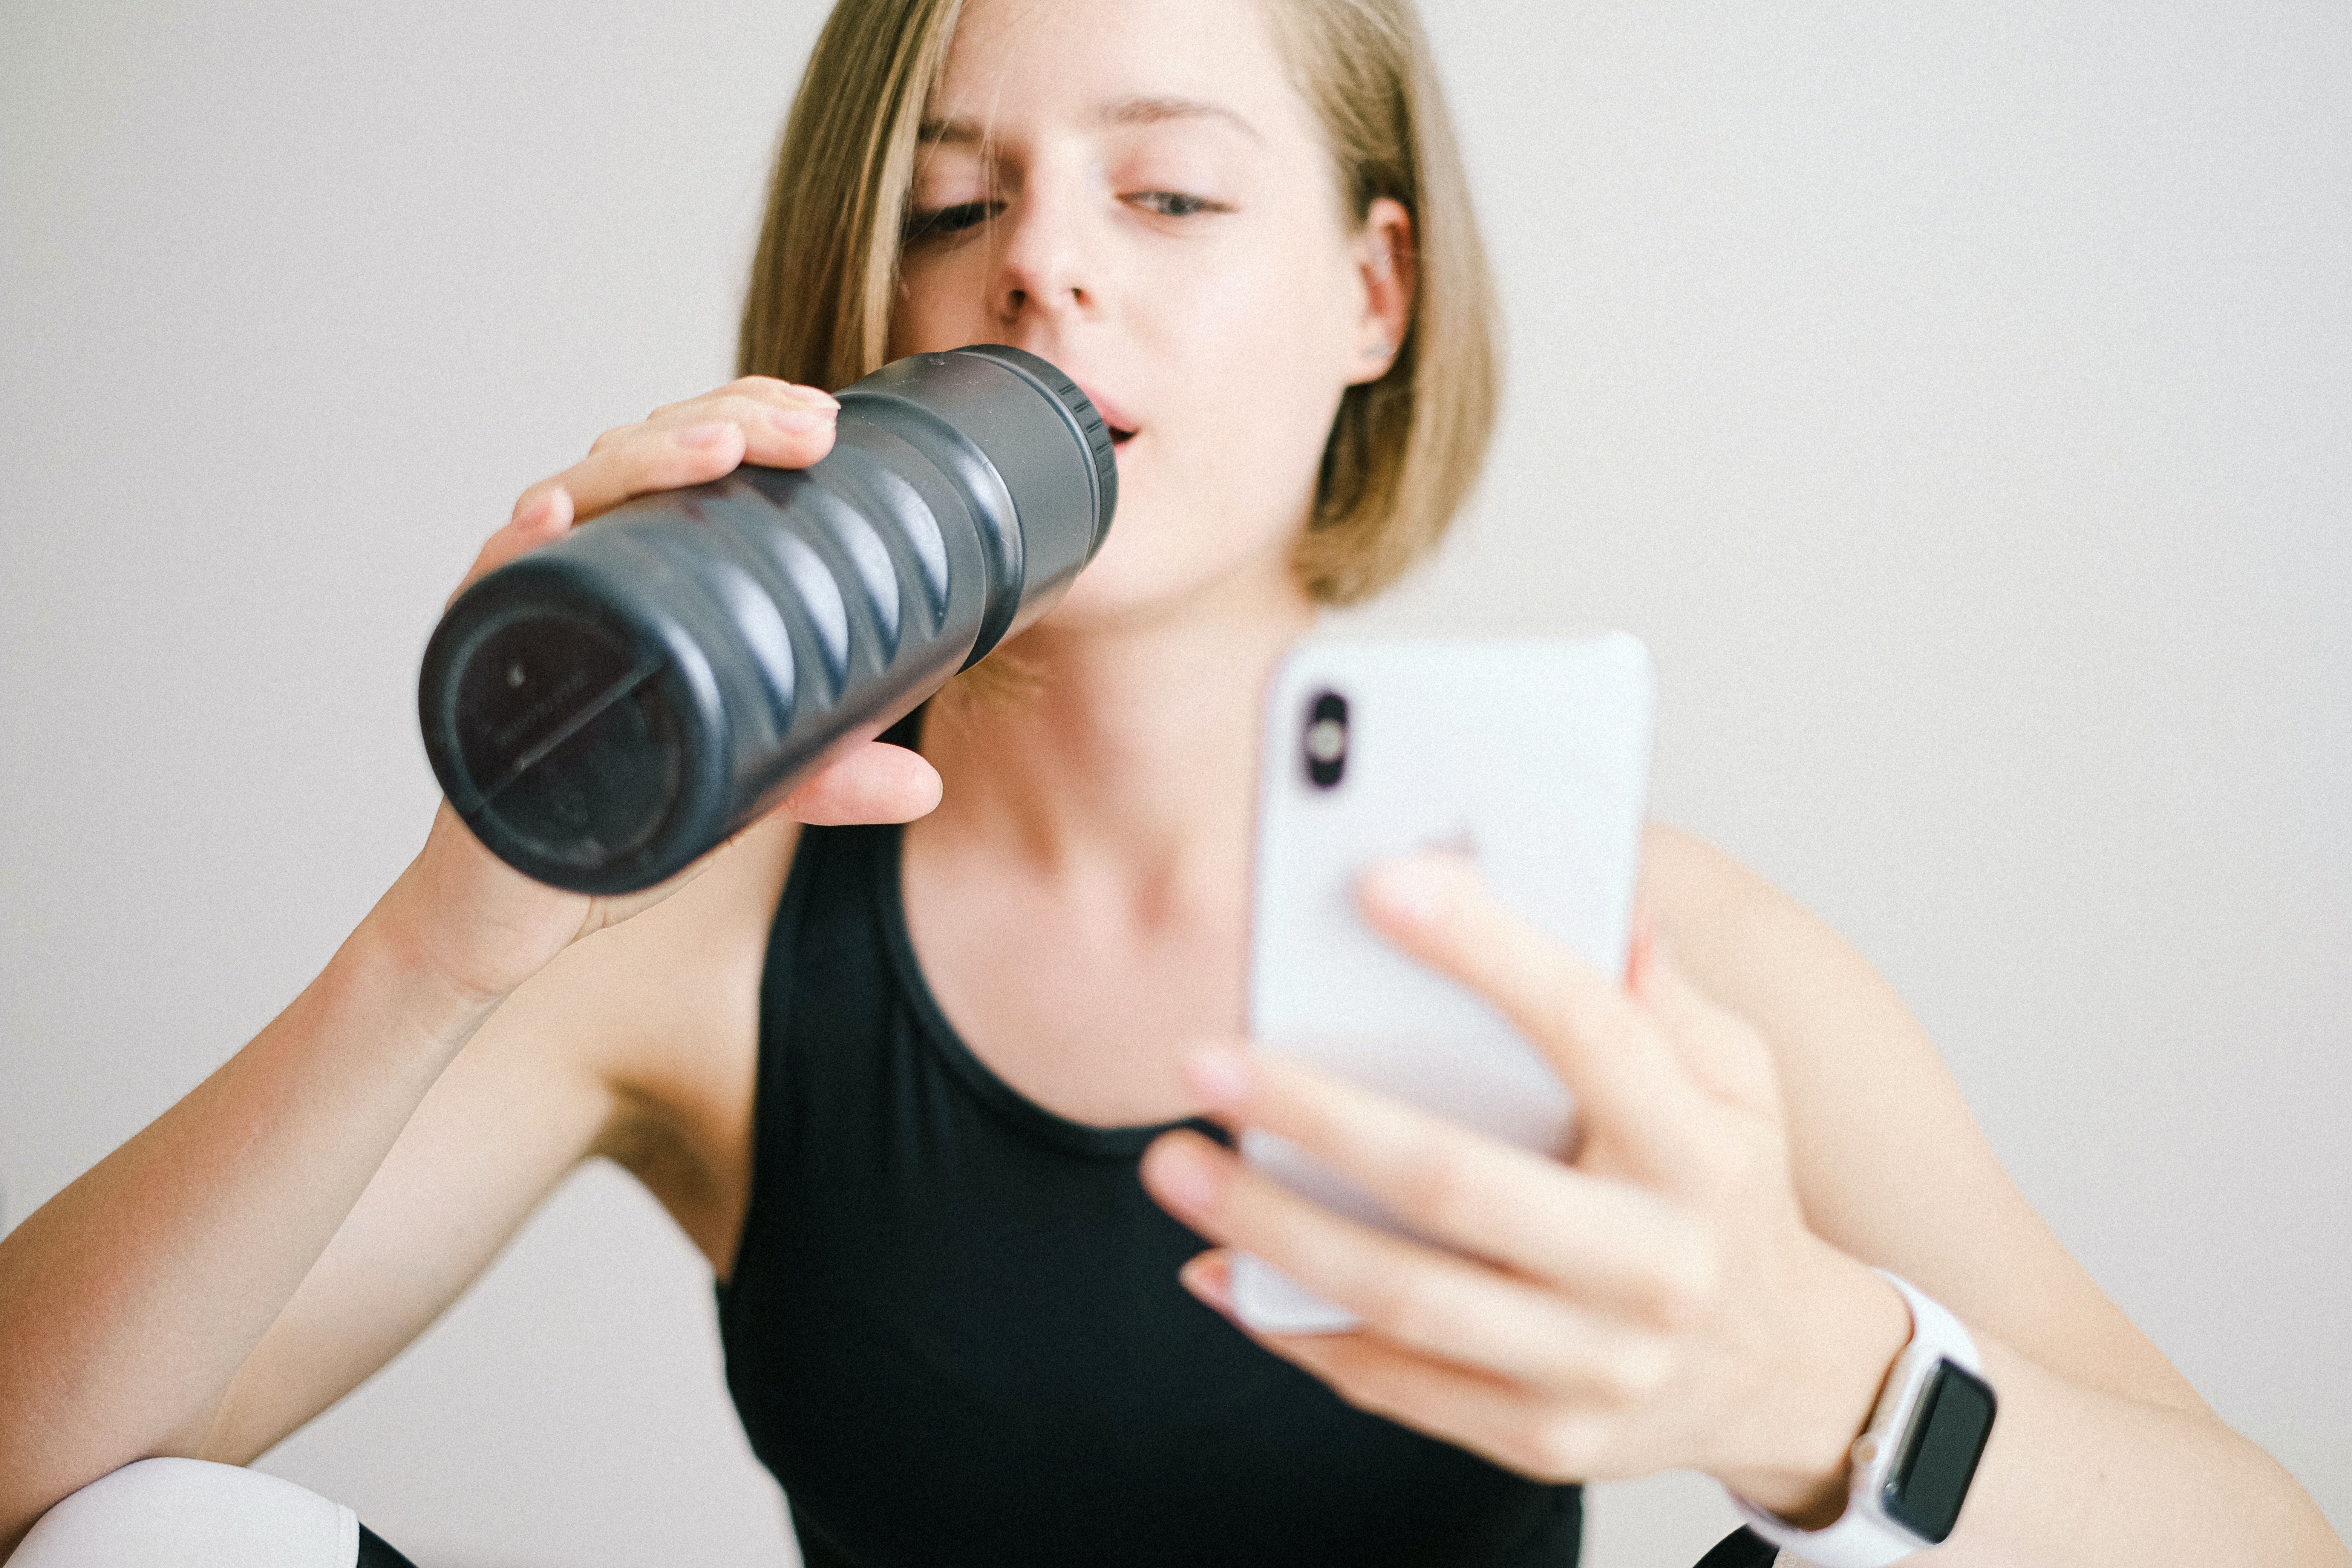 Fitness tech can encourage obsession and addiction